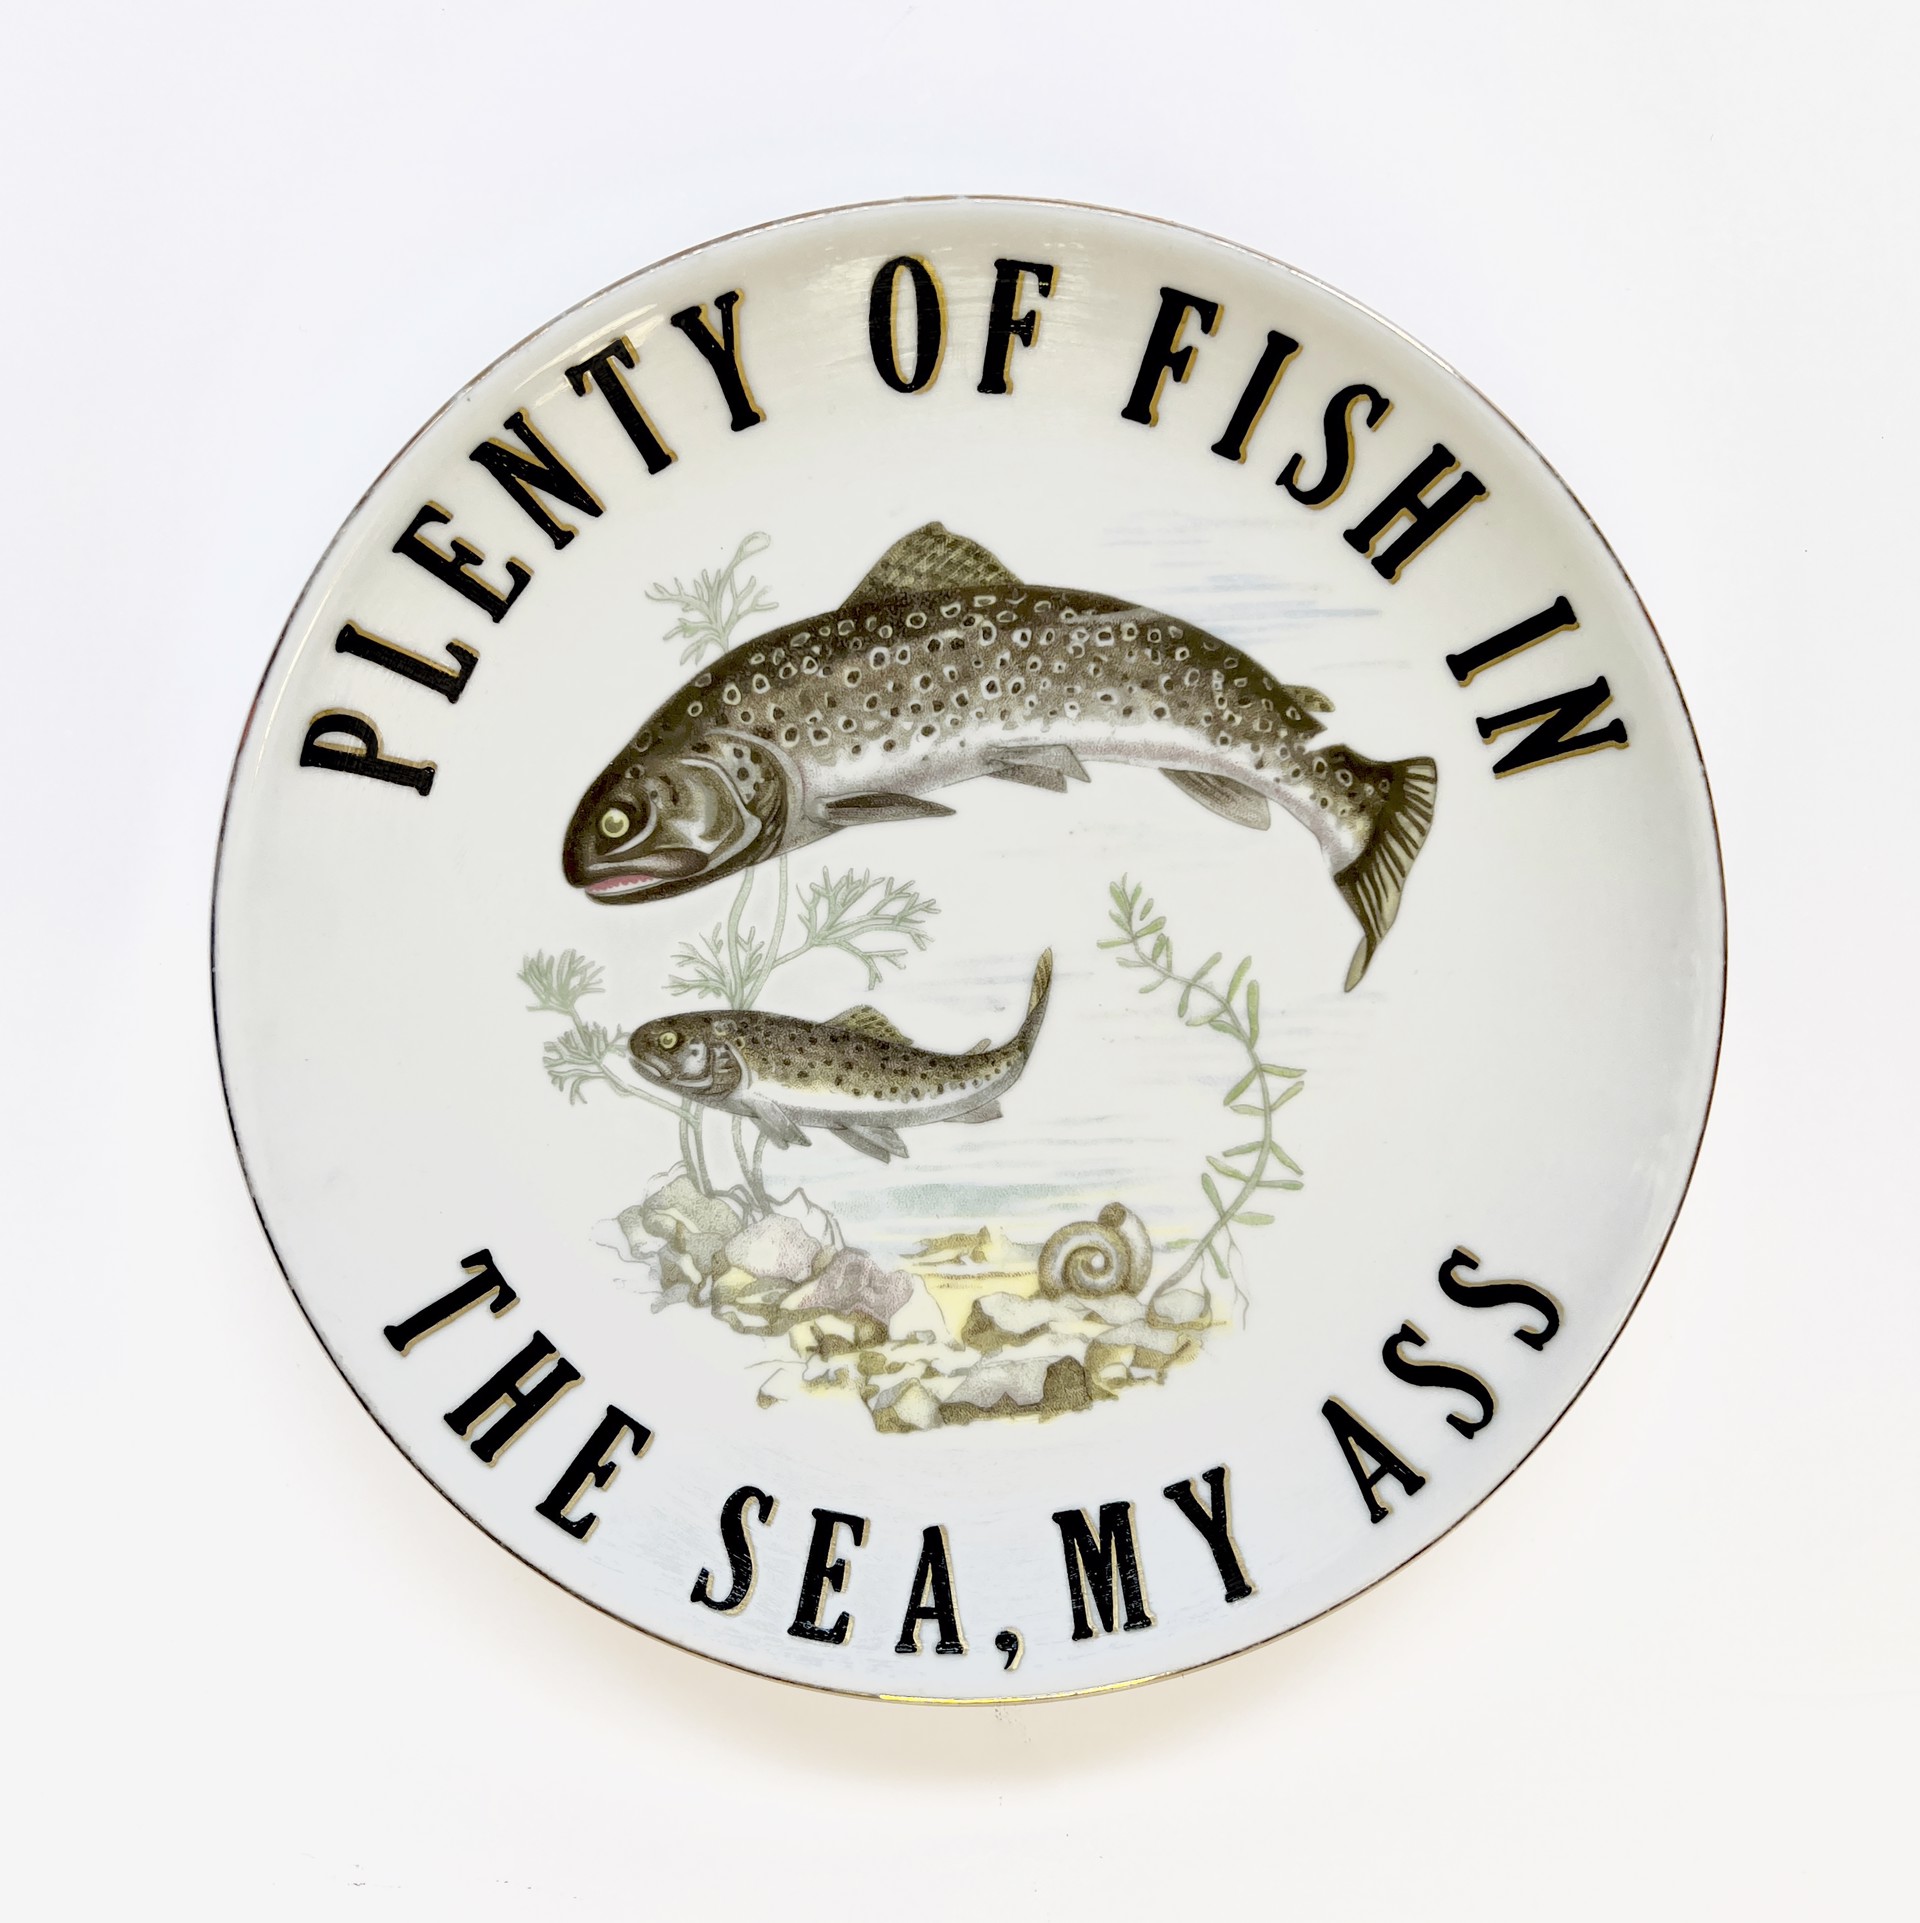 Plenty of fish in the sea (small dinner plate) by Marie-Claude Marquis